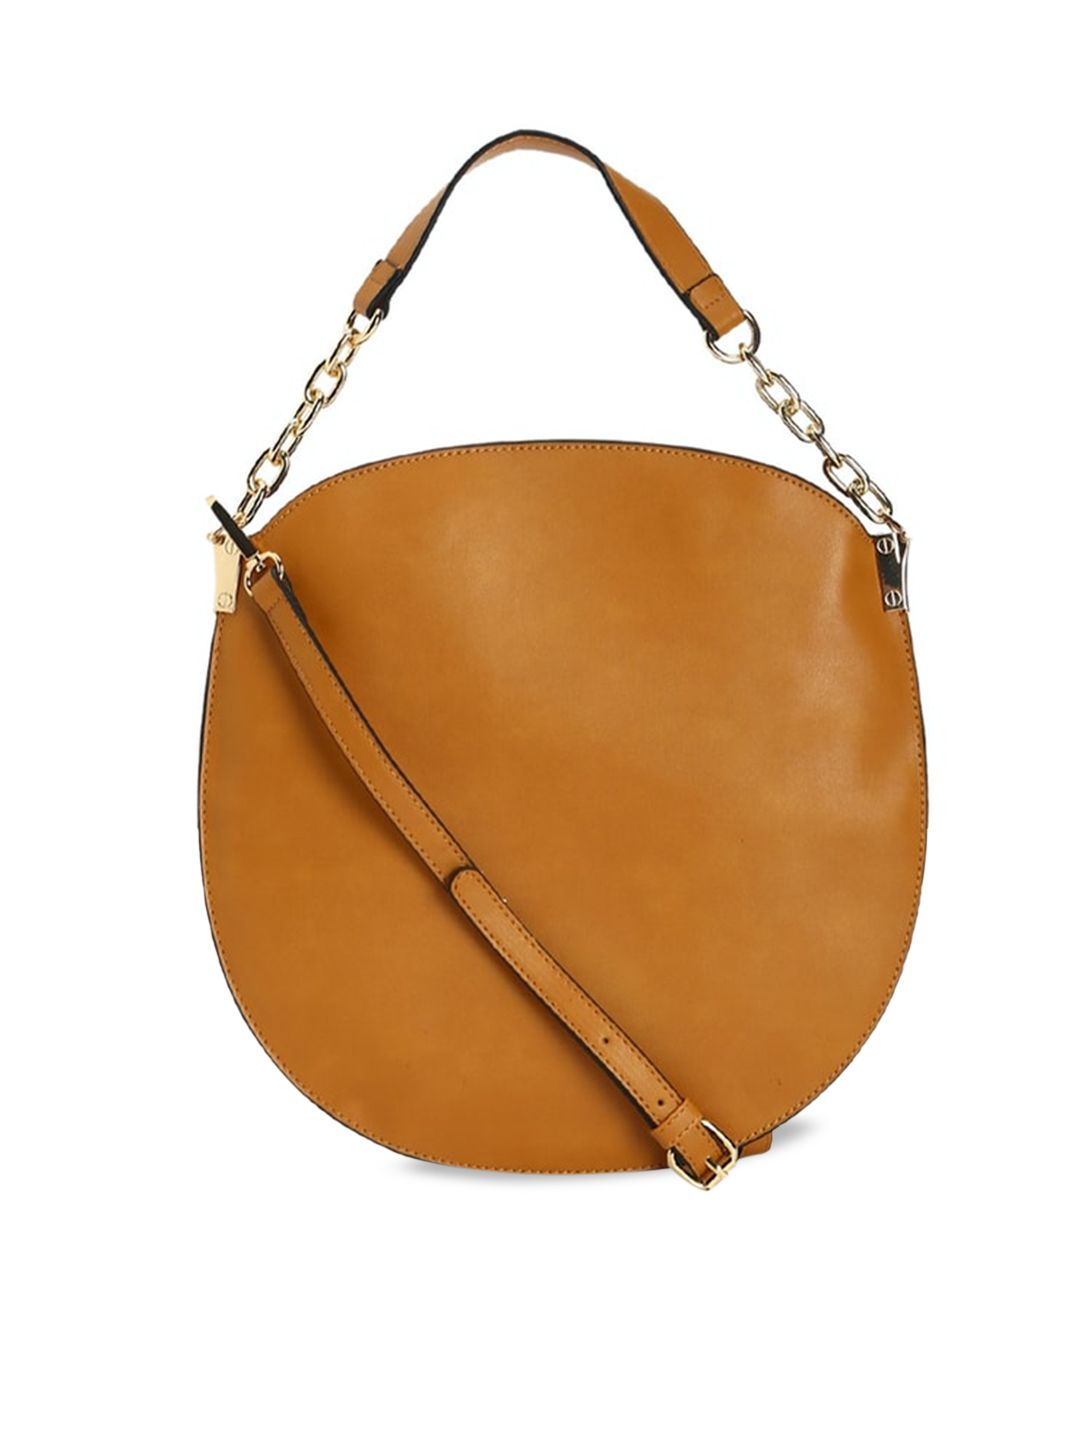 FOREVER 21 Rust Solid Handheld Bag Price in India